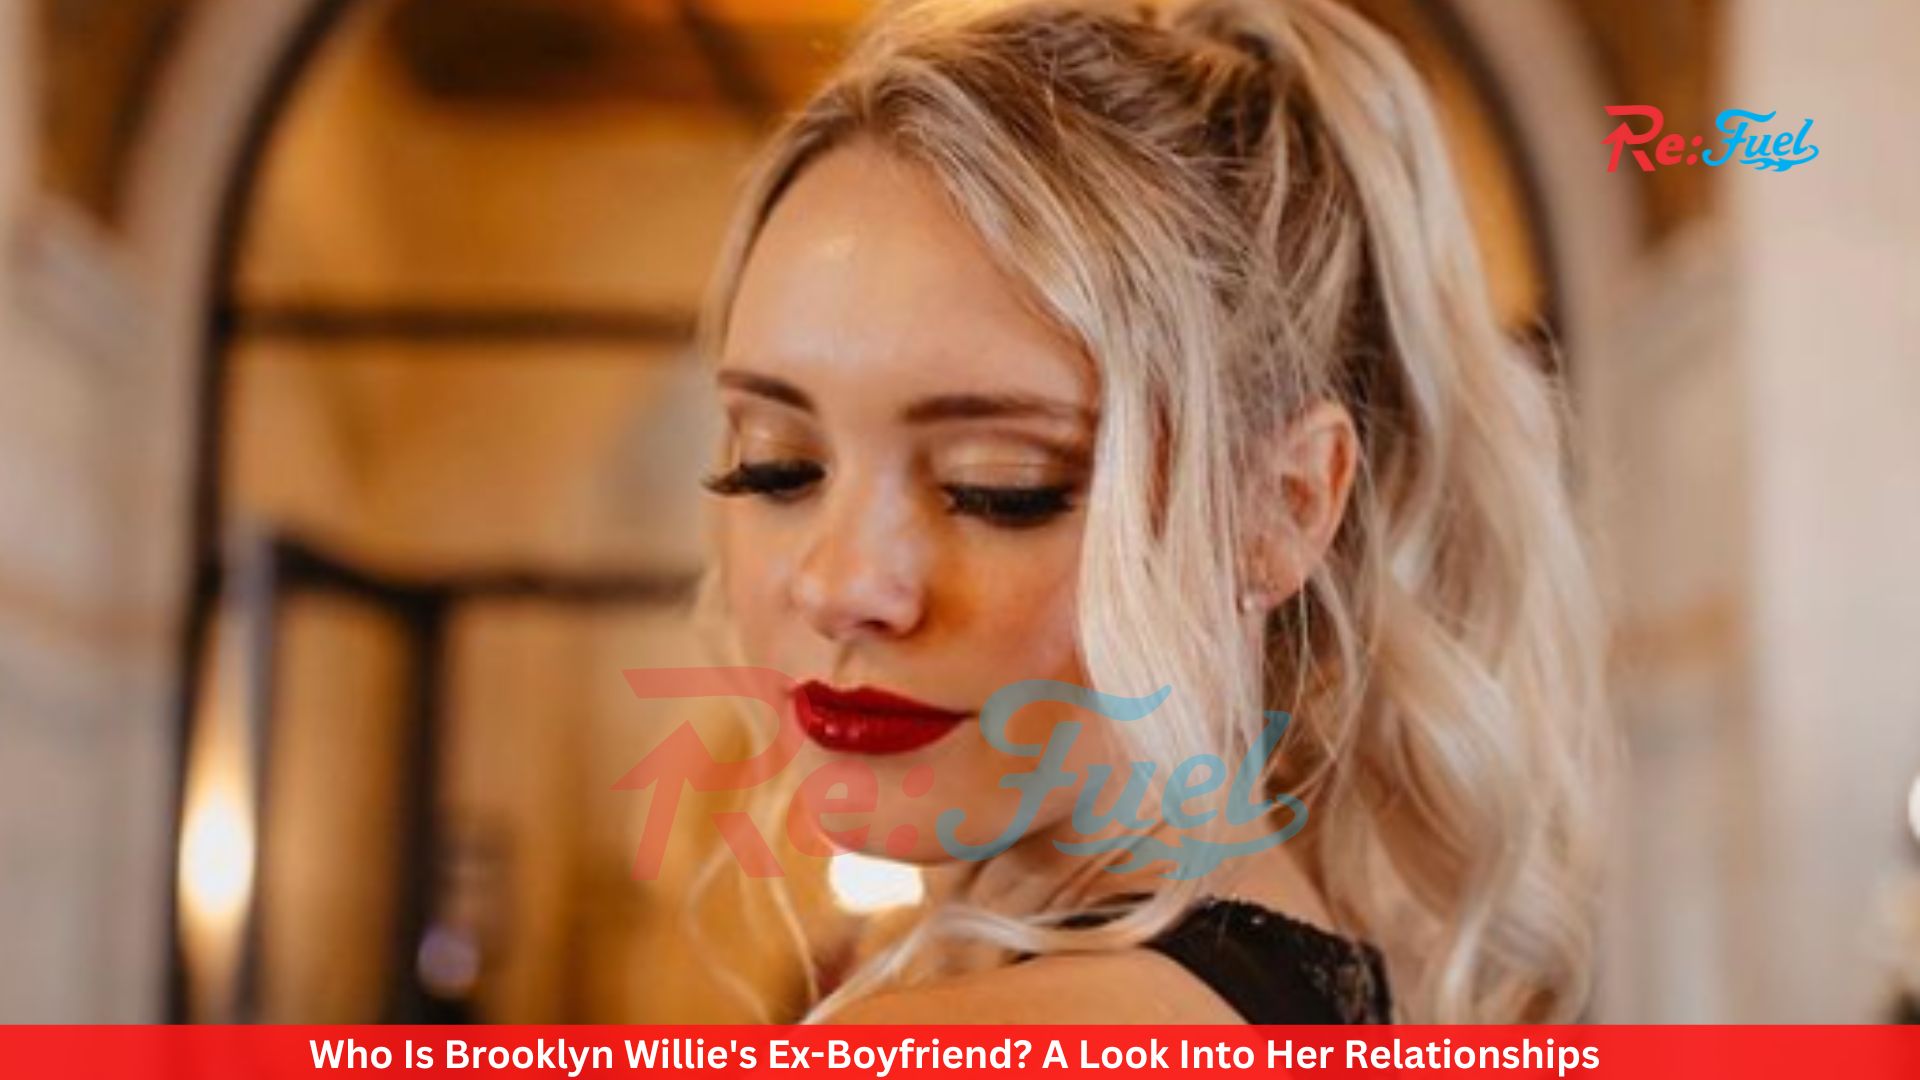 Who Is Brooklyn Willie's Ex-Boyfriend? A Look Into Her Relationships